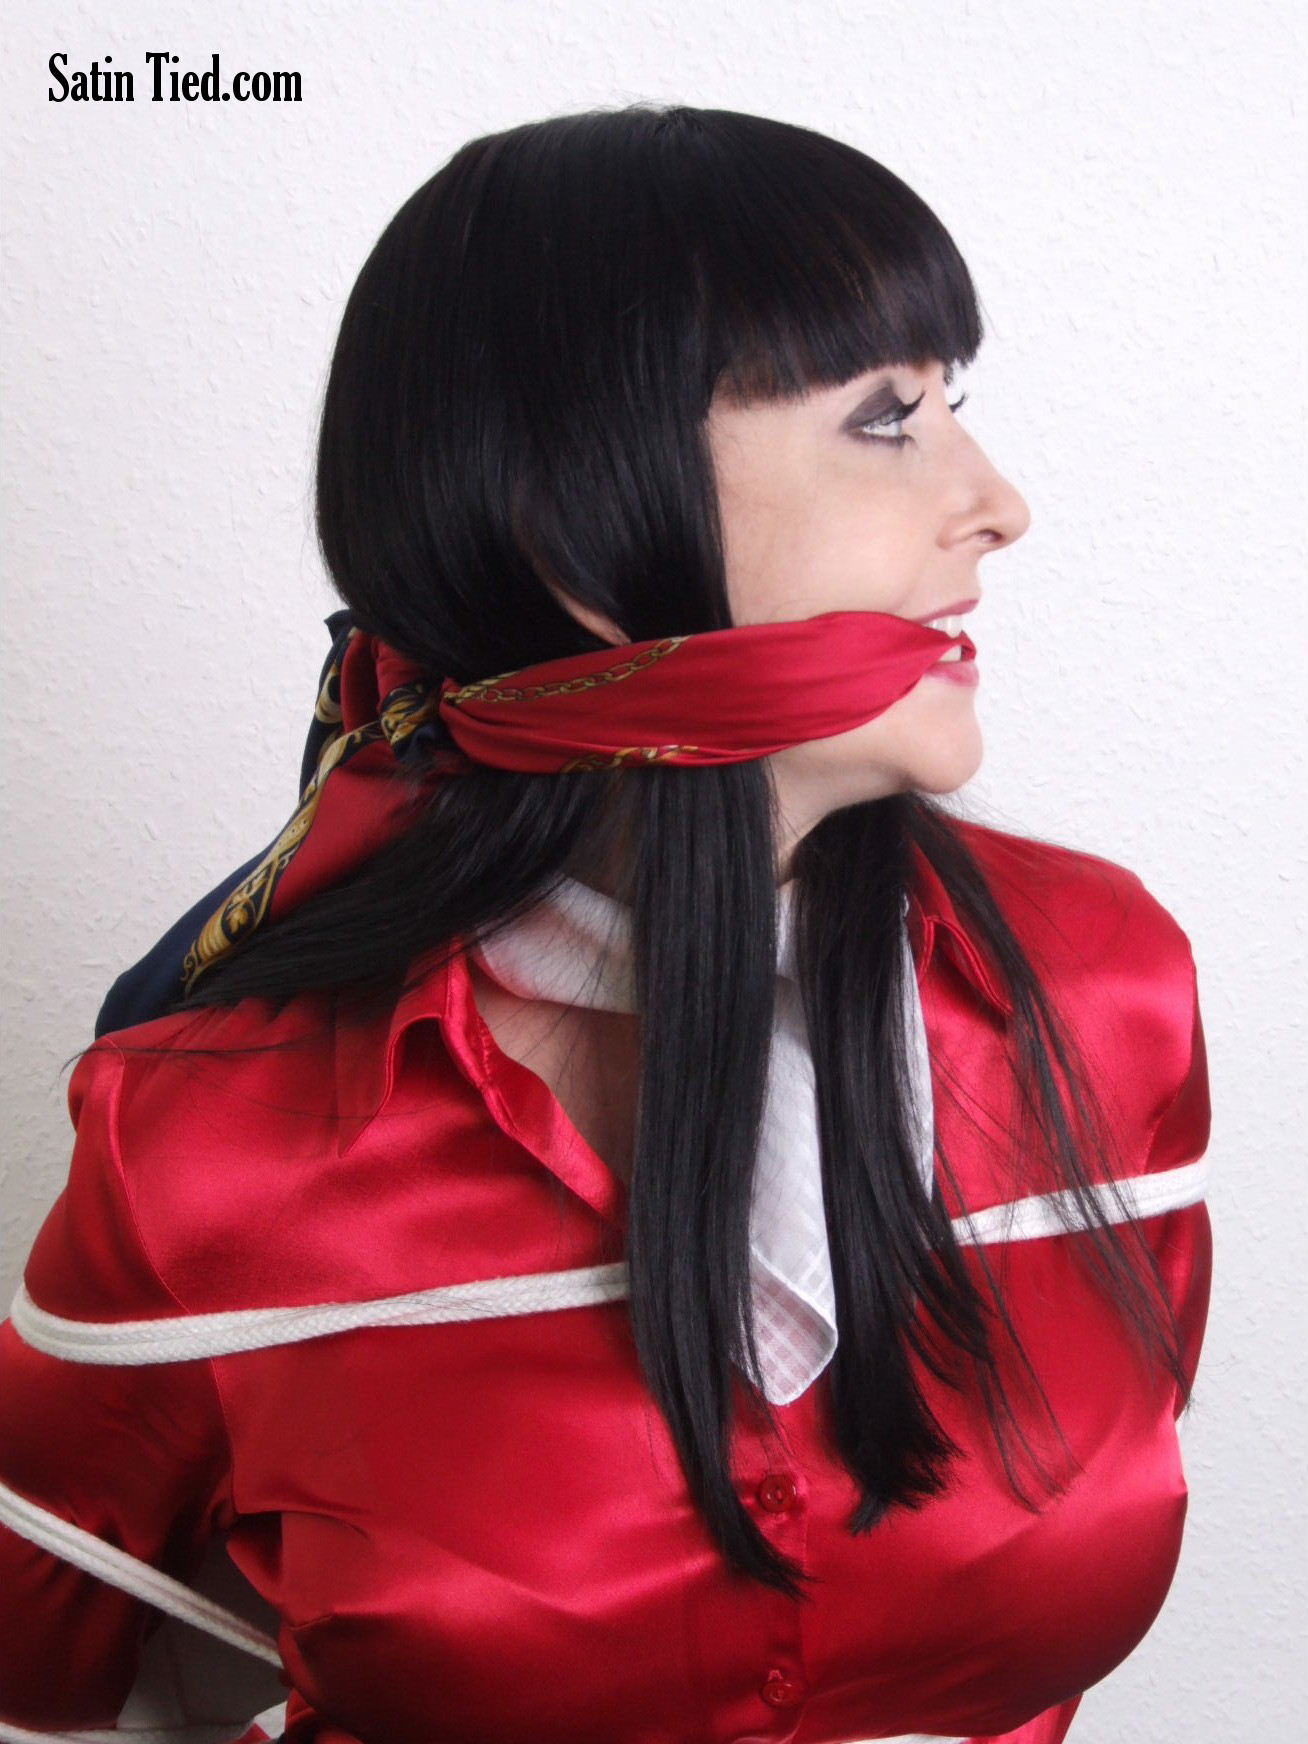 Satin Tied: A Night in Red Satin 3